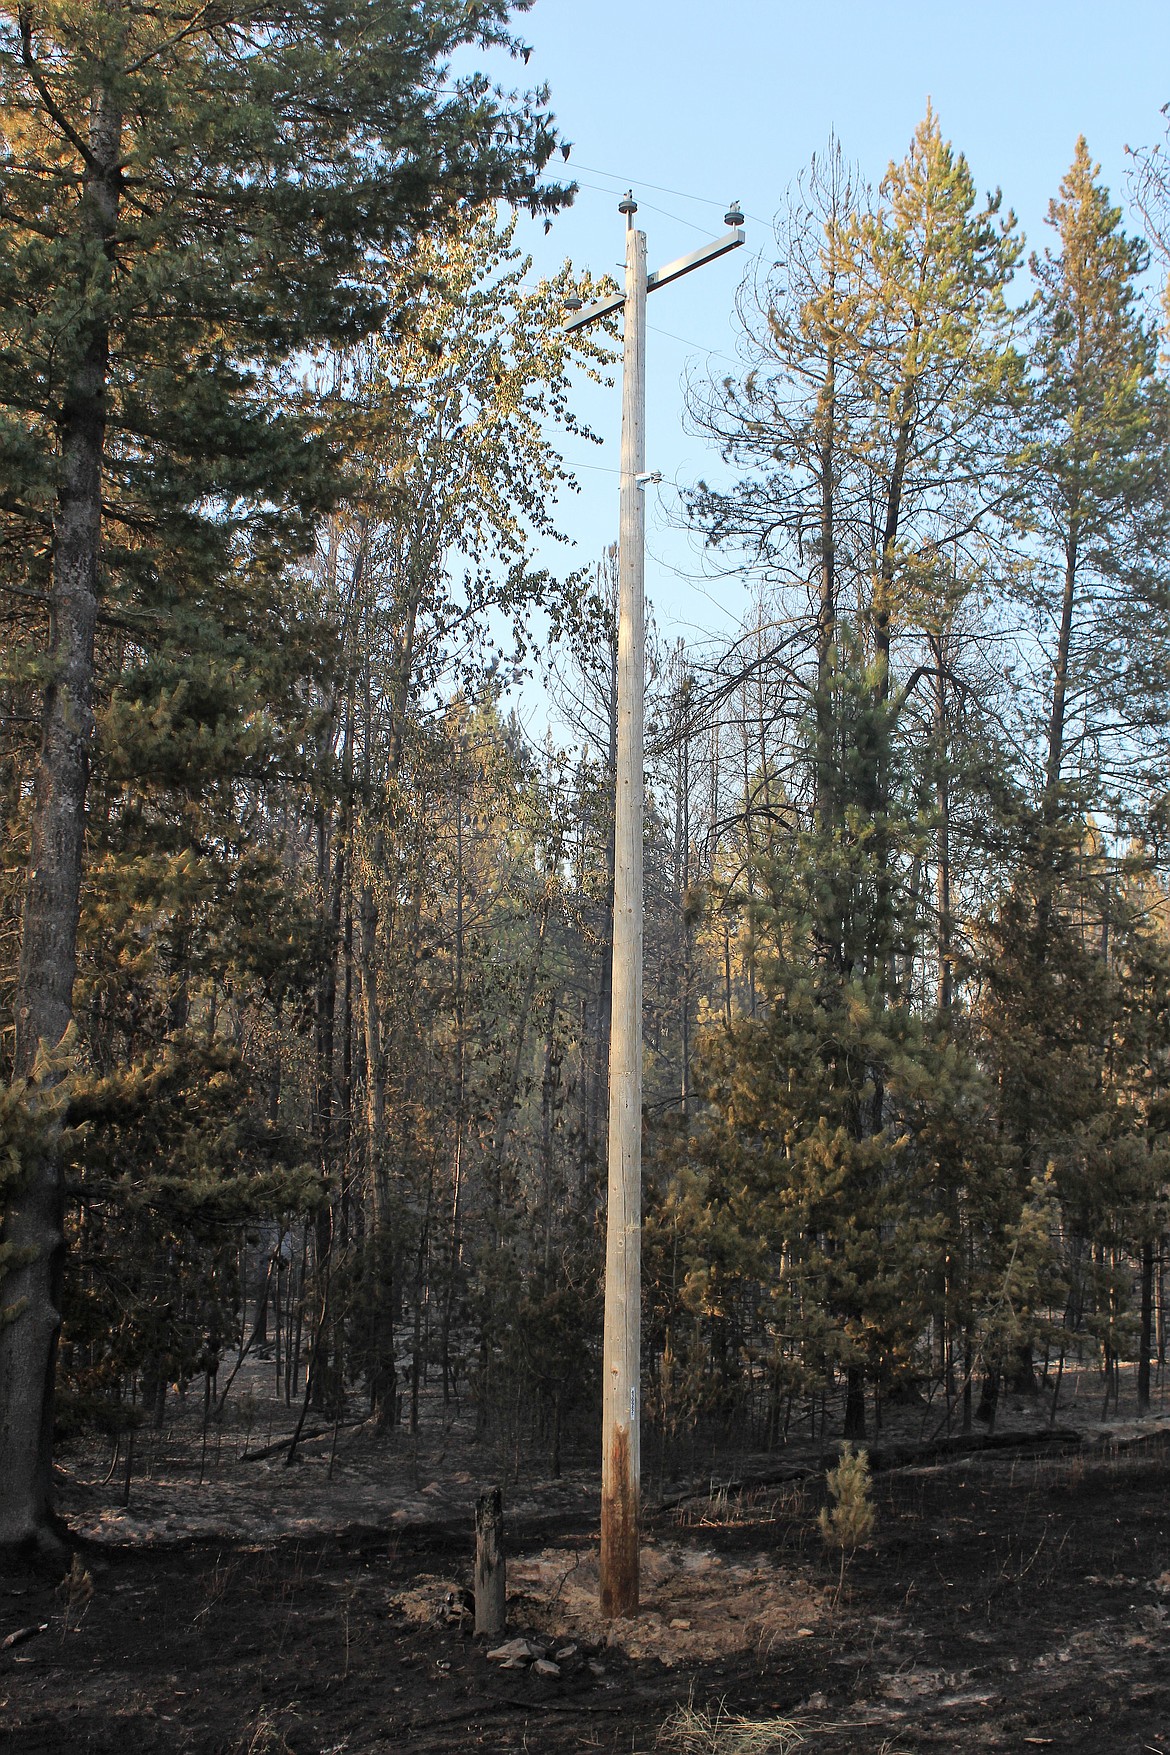 The new power pole installed by Avista stands next to the stump of the former one.